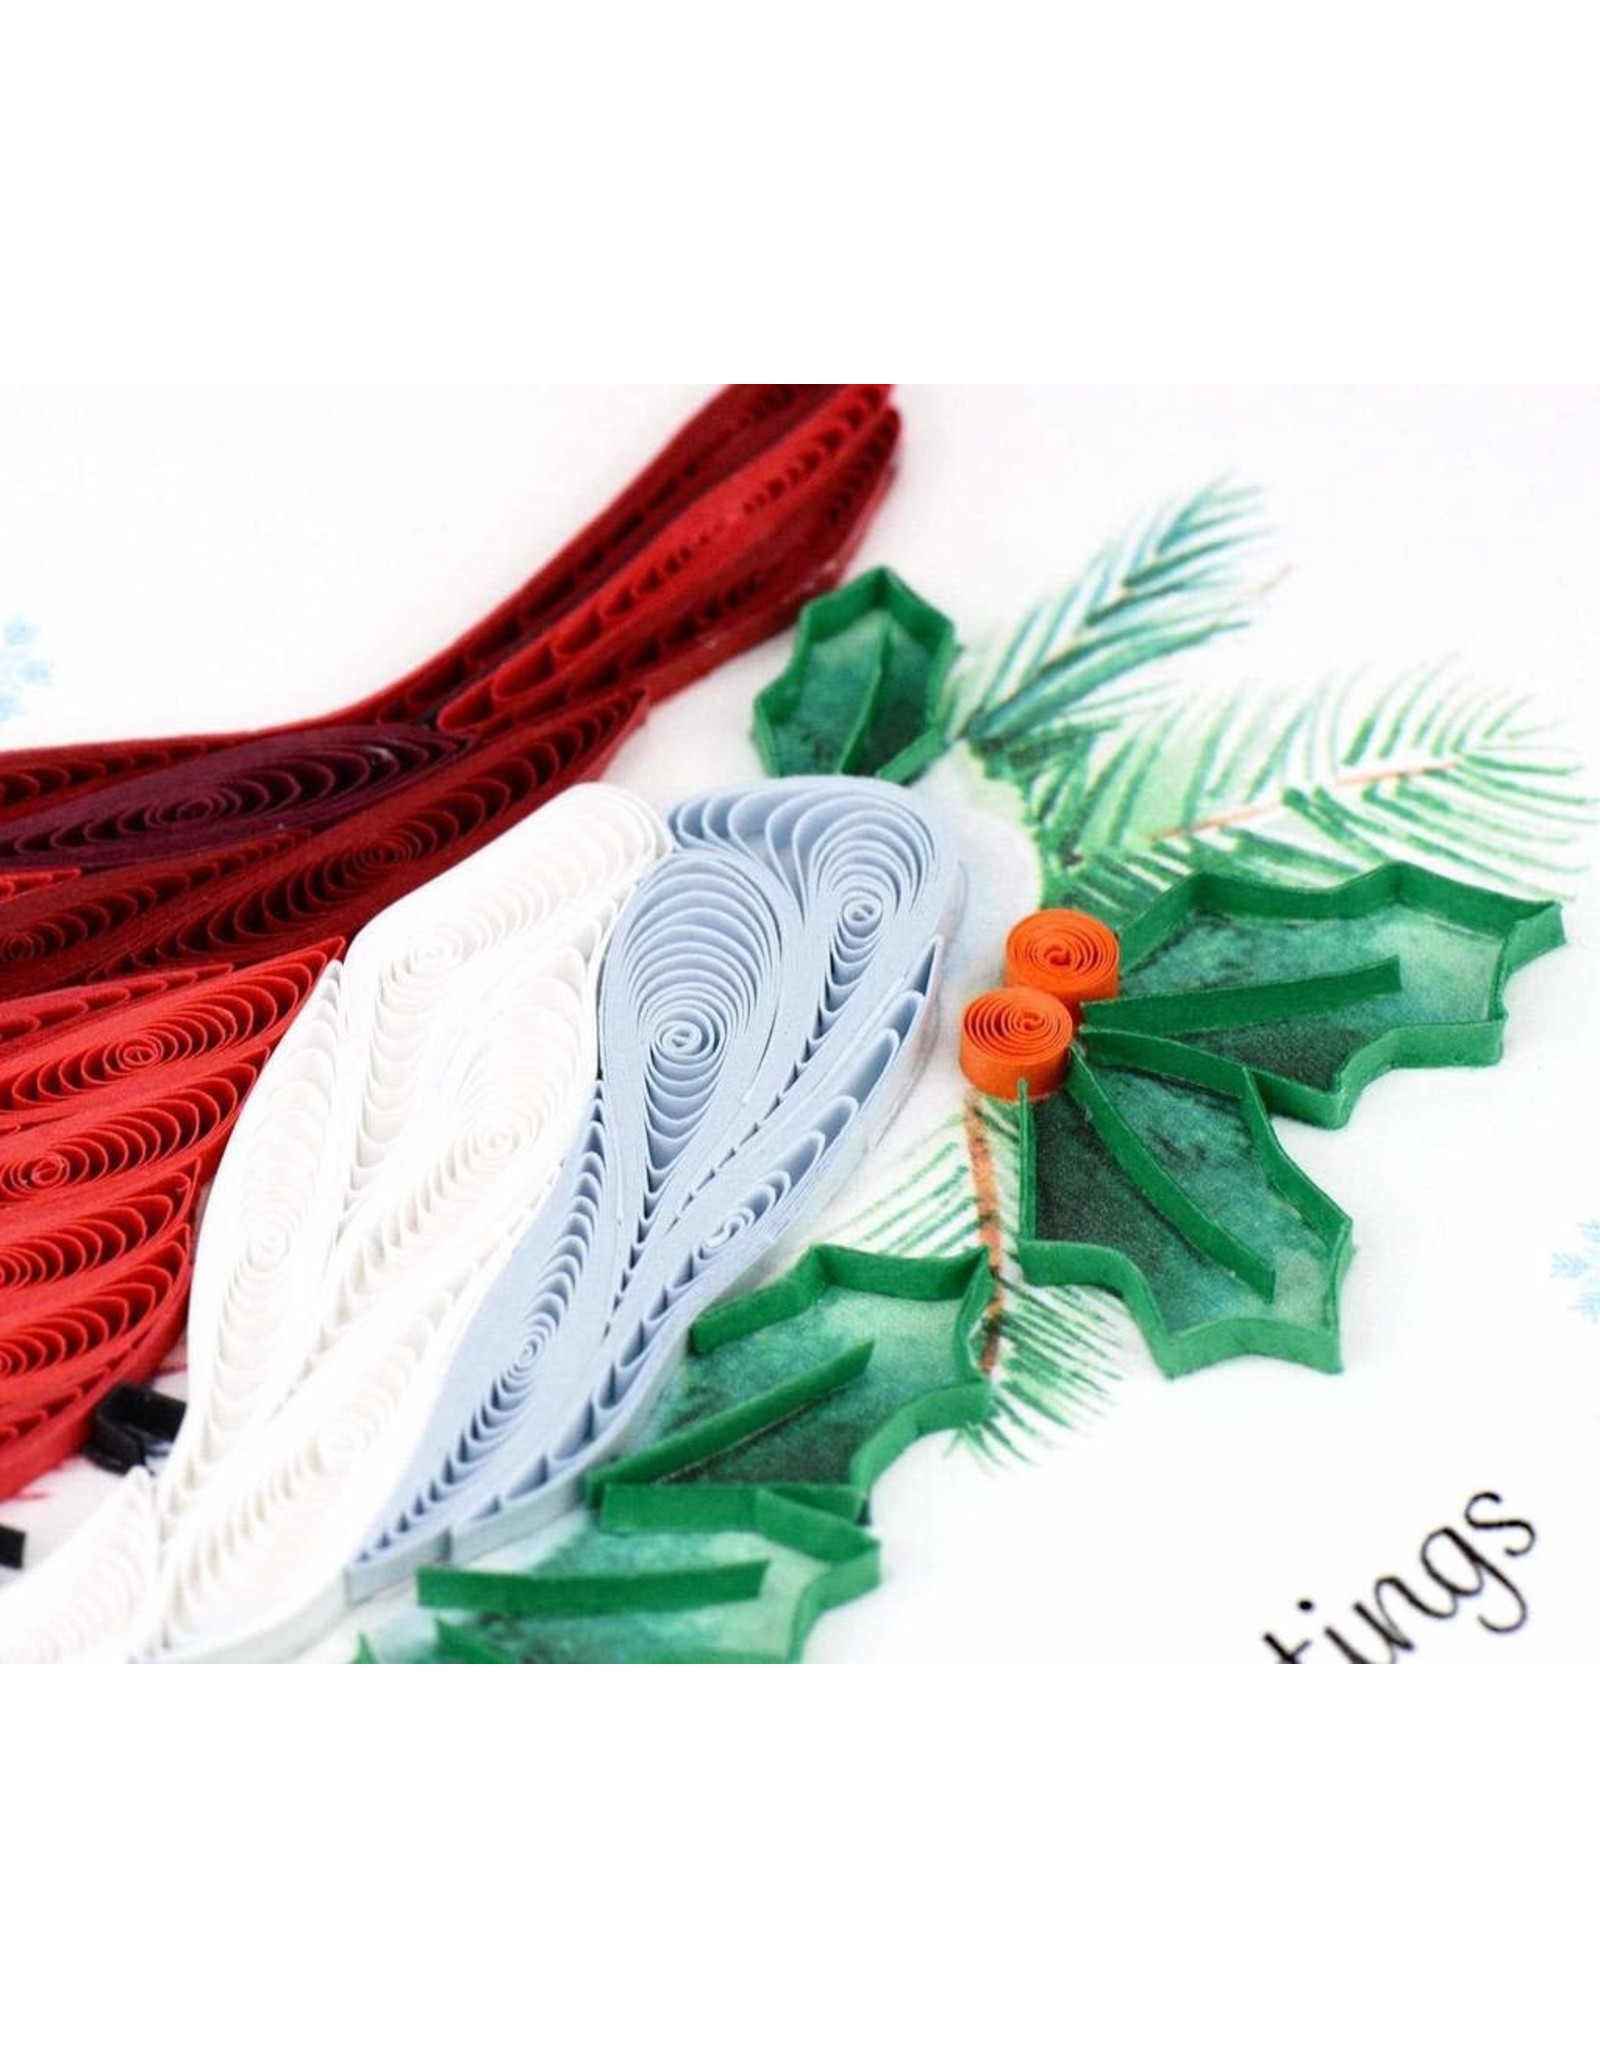 Quilling Card Quilled Red Cardinal Christmas Greeting Card